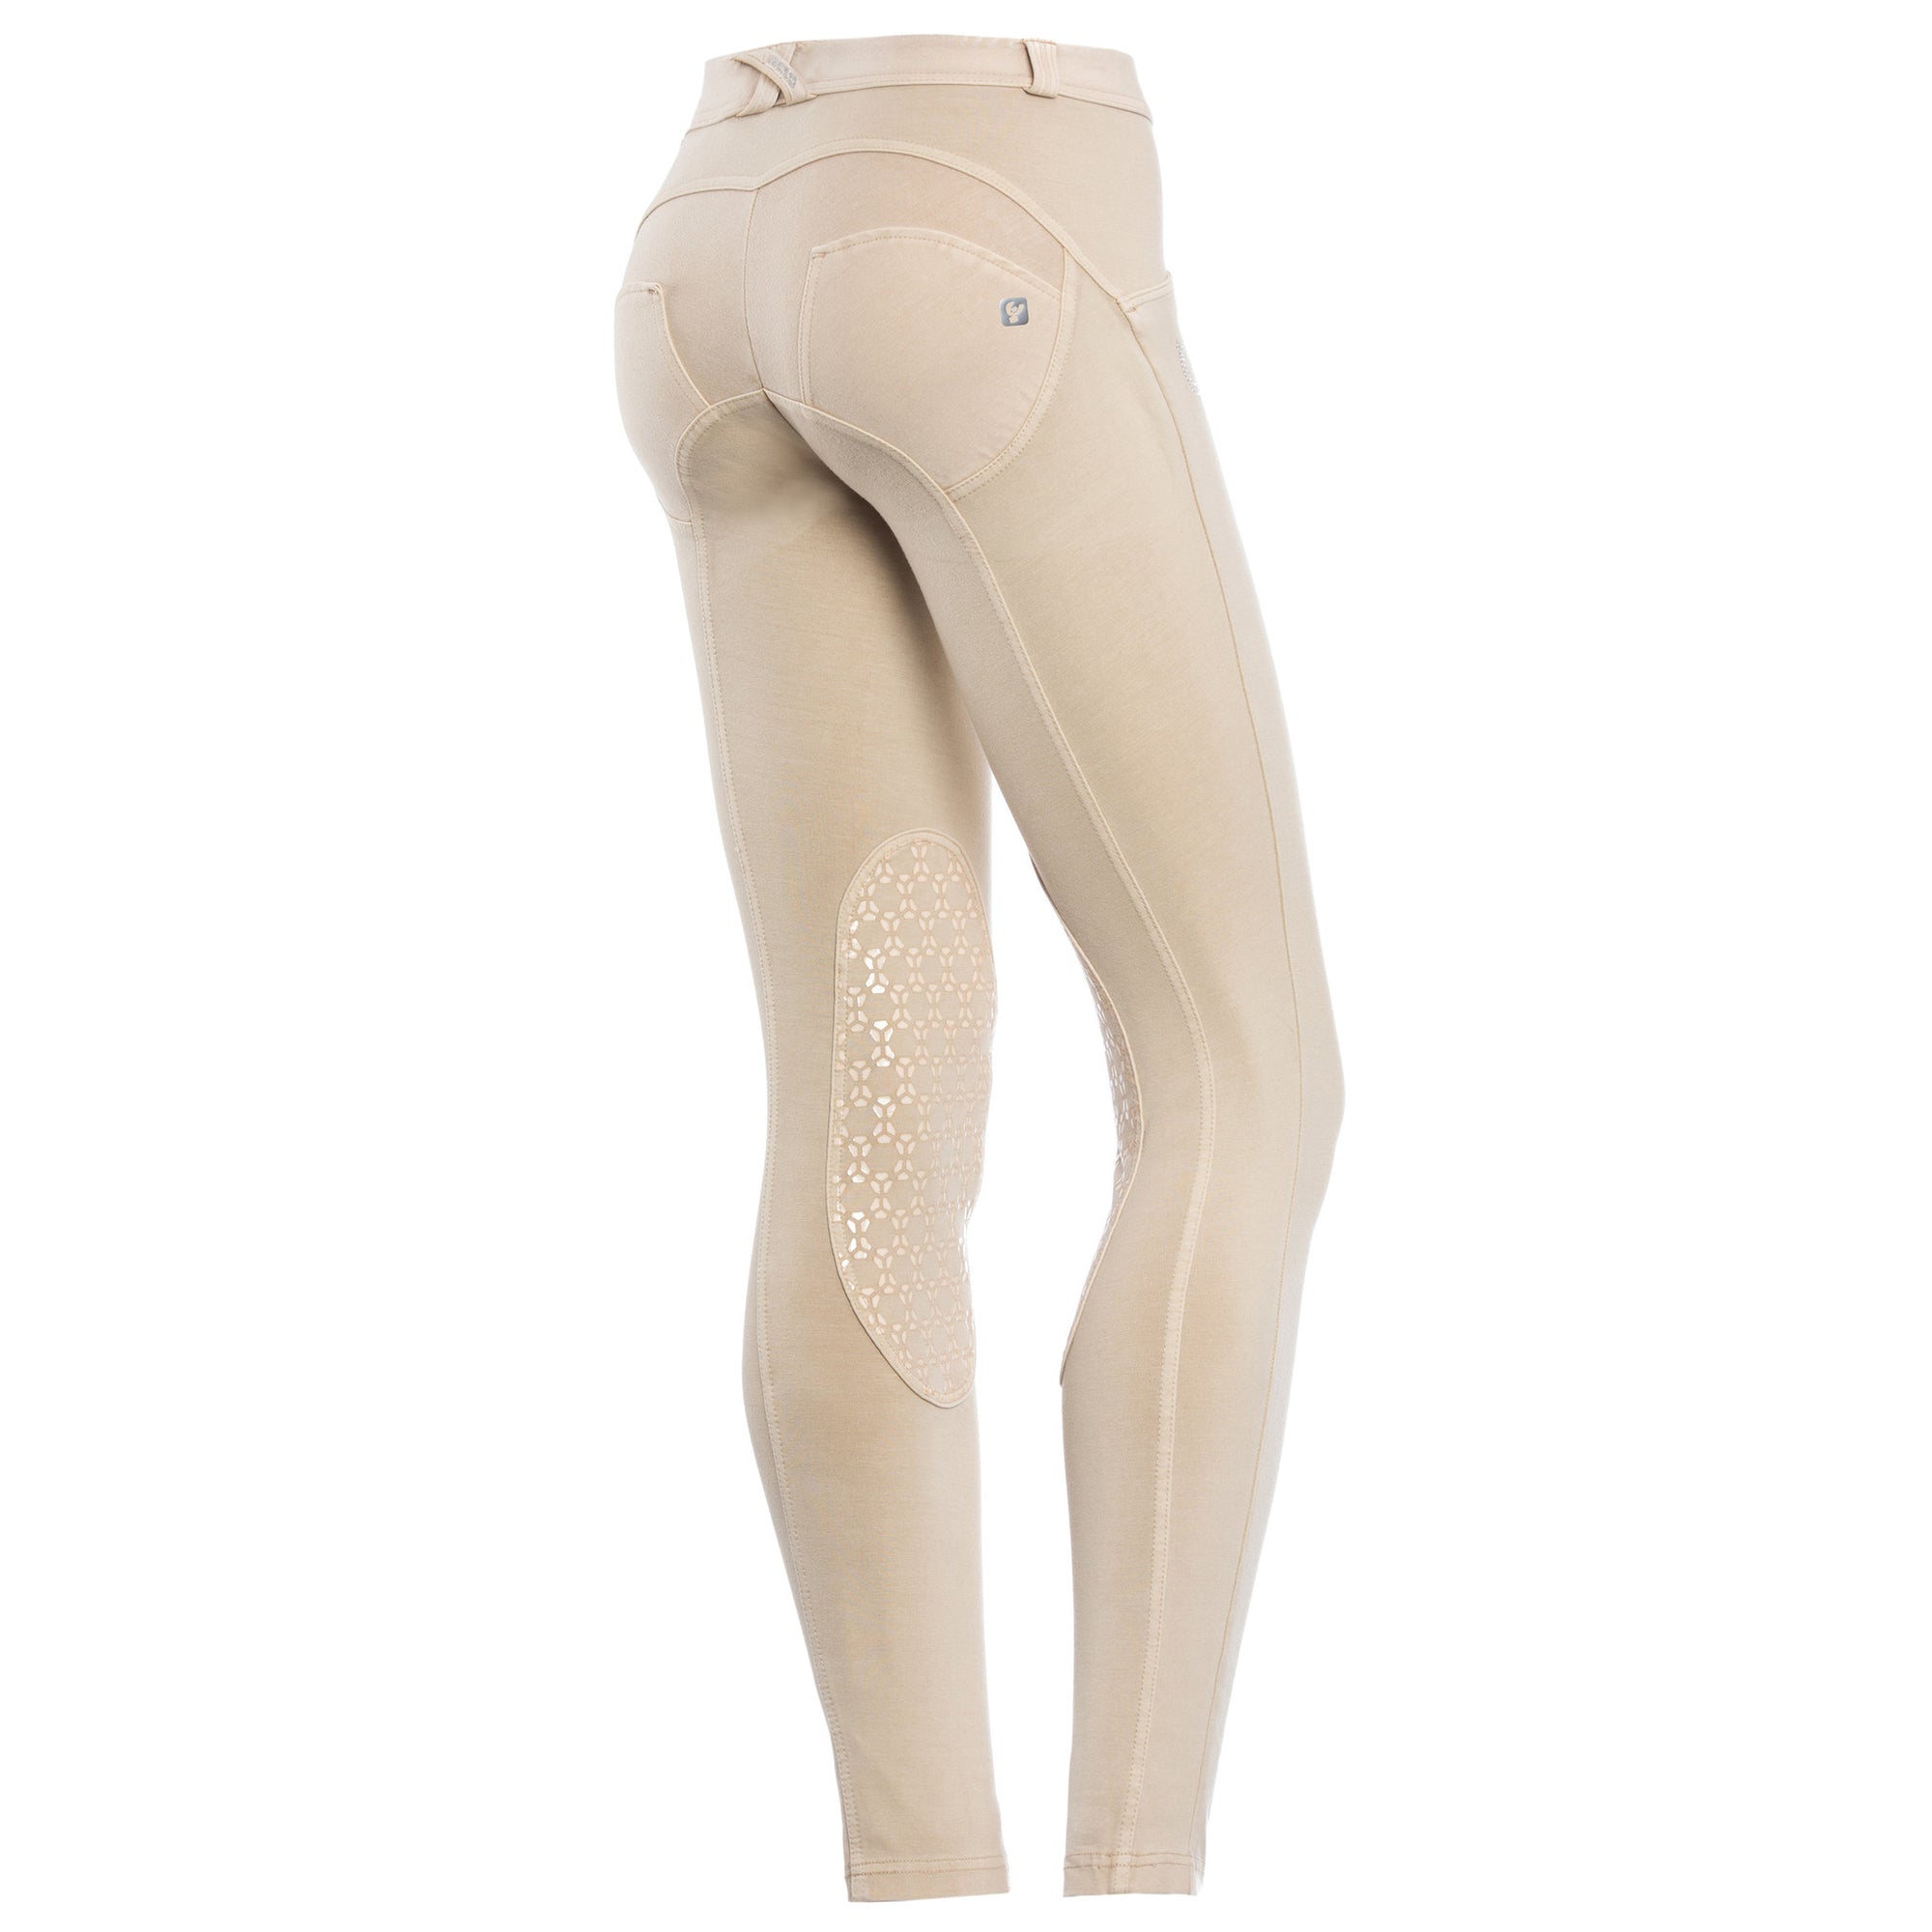 FREDDY WR.UP RIDING PANT - Beige - LIVIFY
 - 1